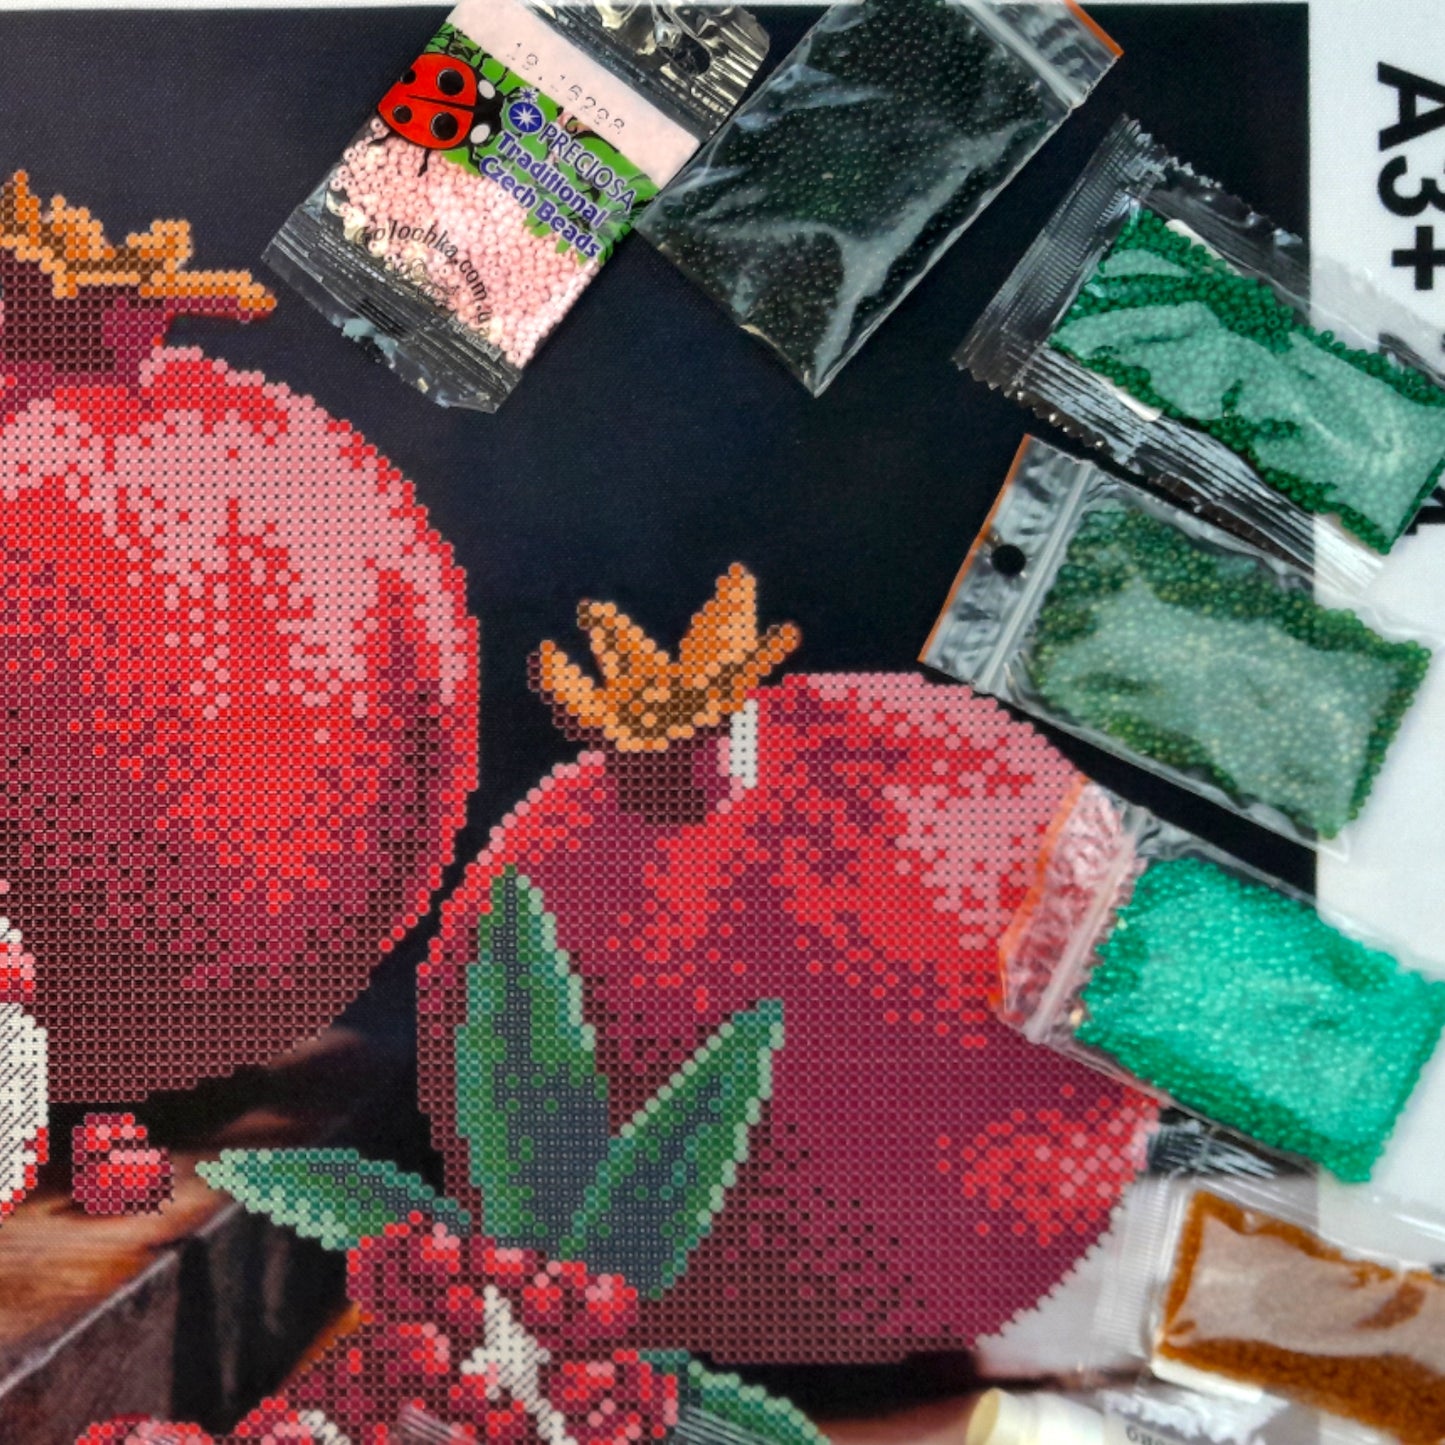 DIY Bead embroidery kit "Pomegranate". Size: 18.8-12.6 in (48-32 сm) - VadymShop